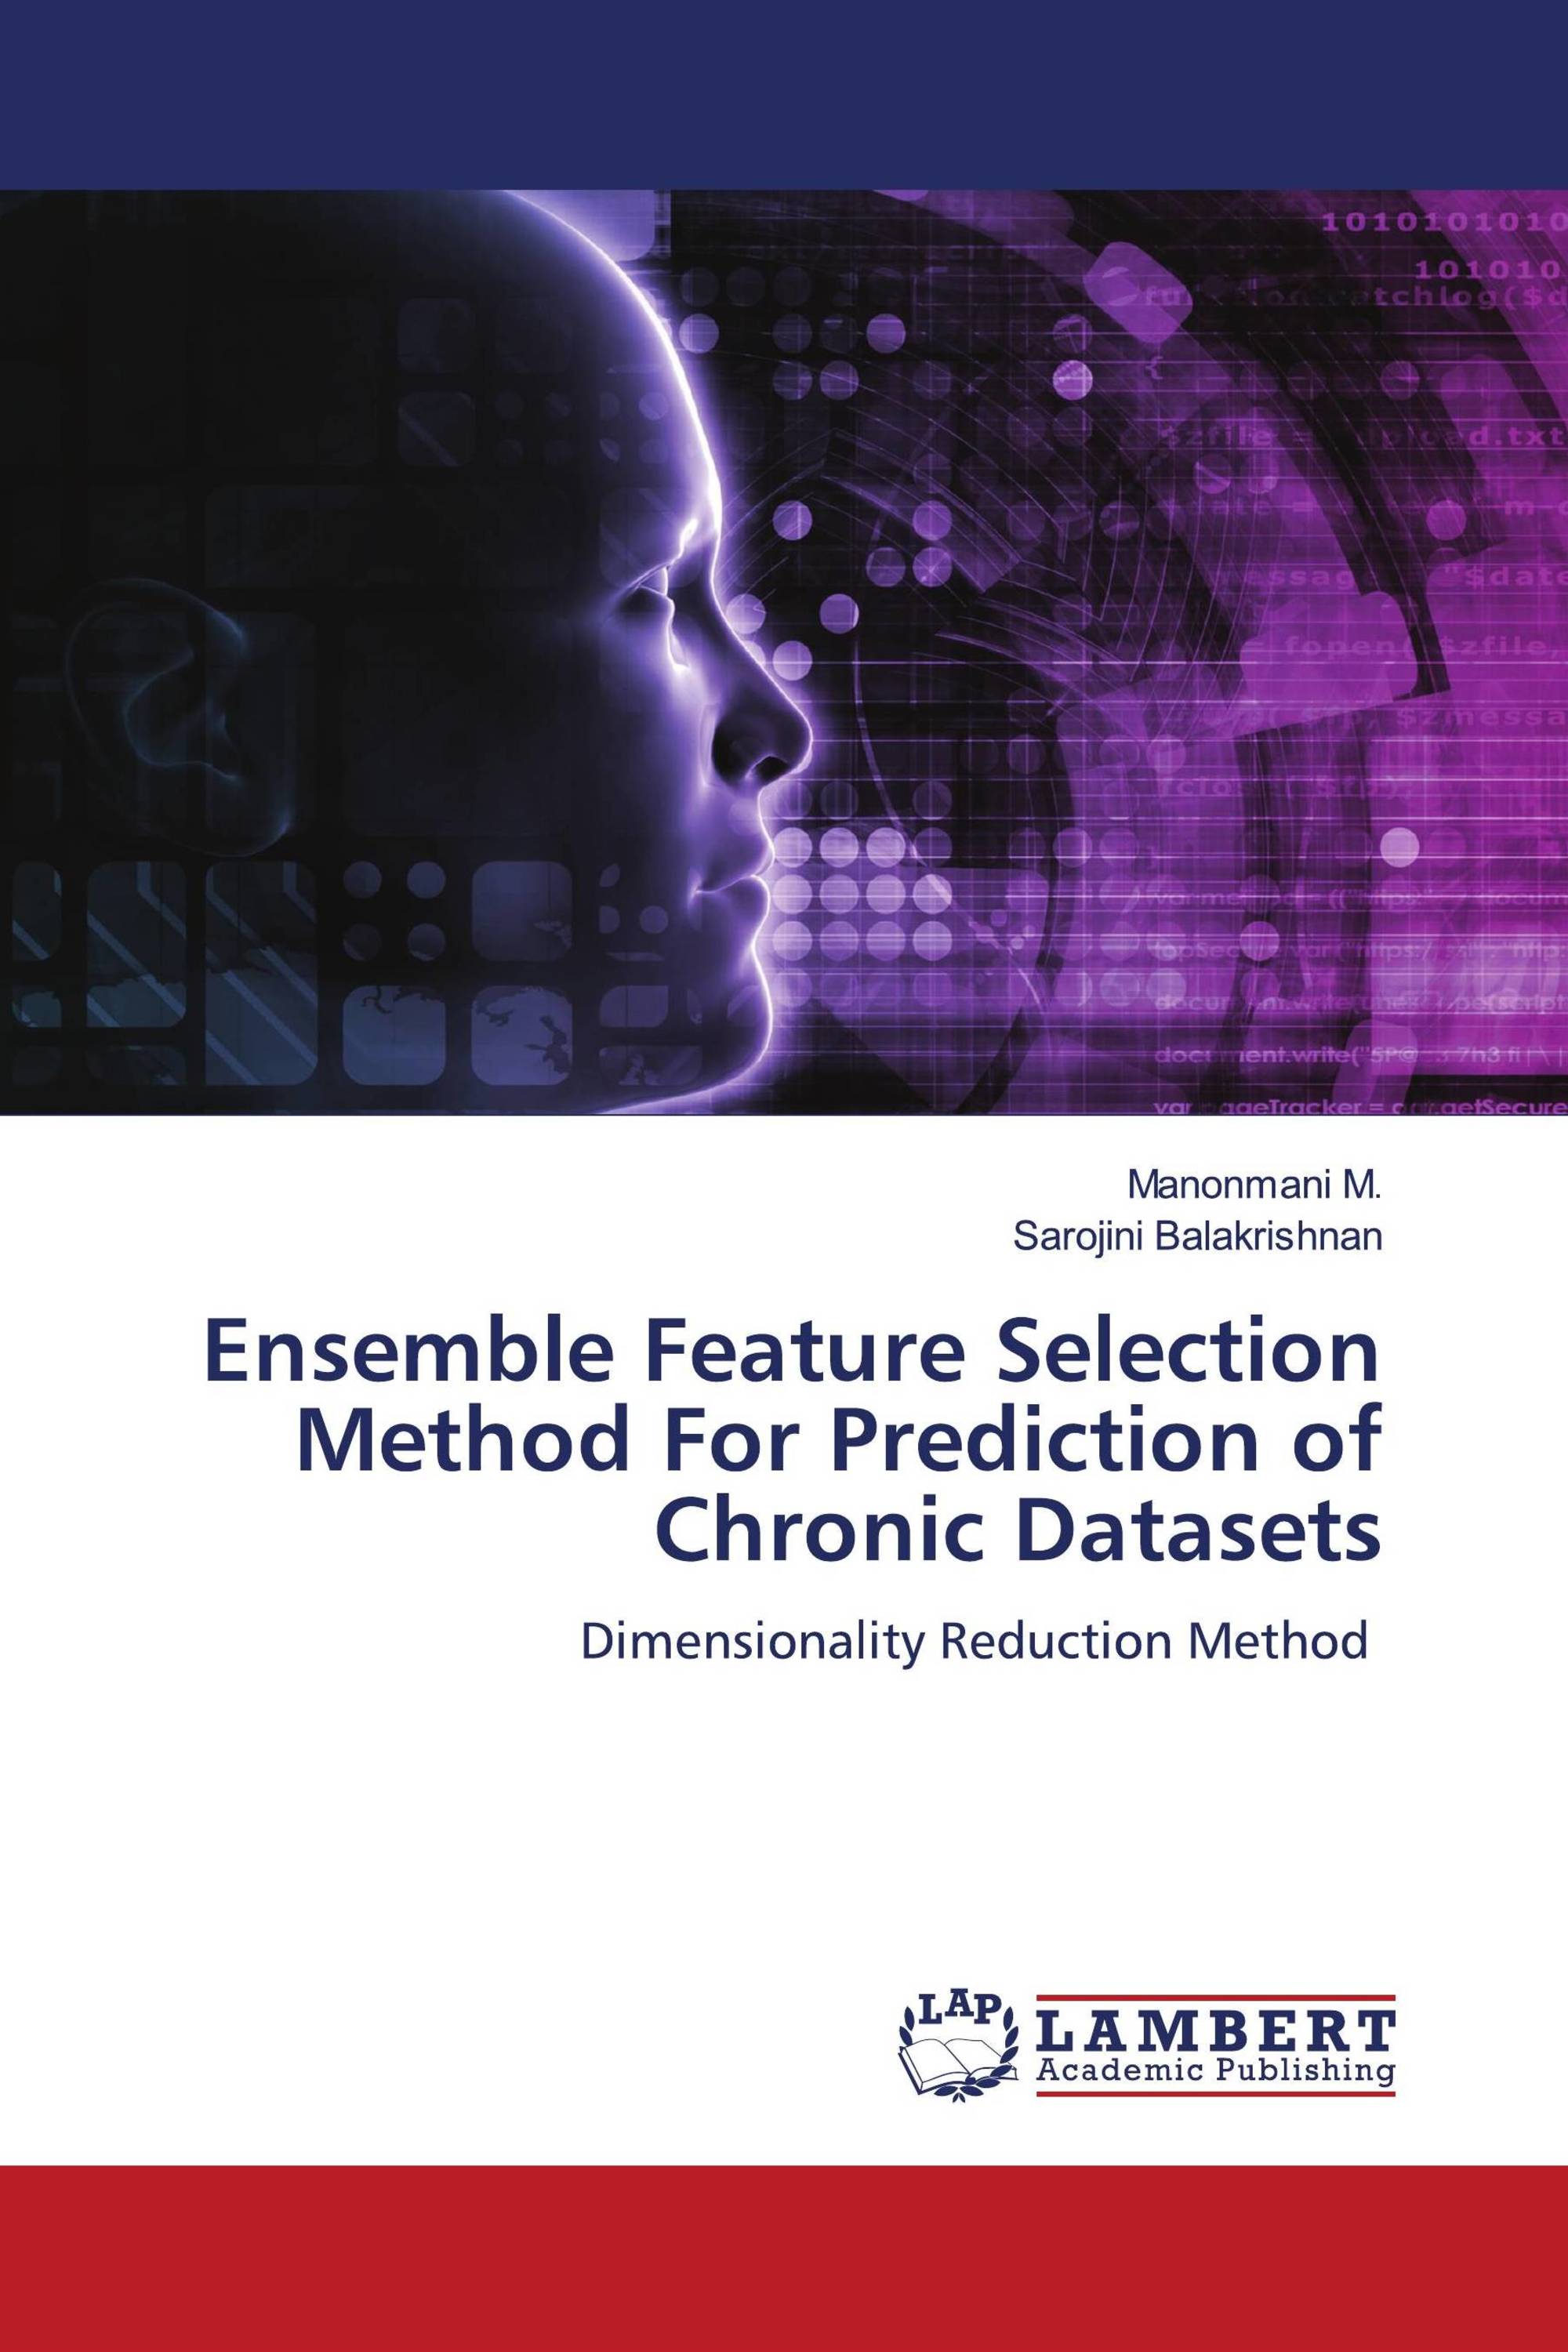 Ensemble Feature Selection Method For Prediction of Chronic Datasets